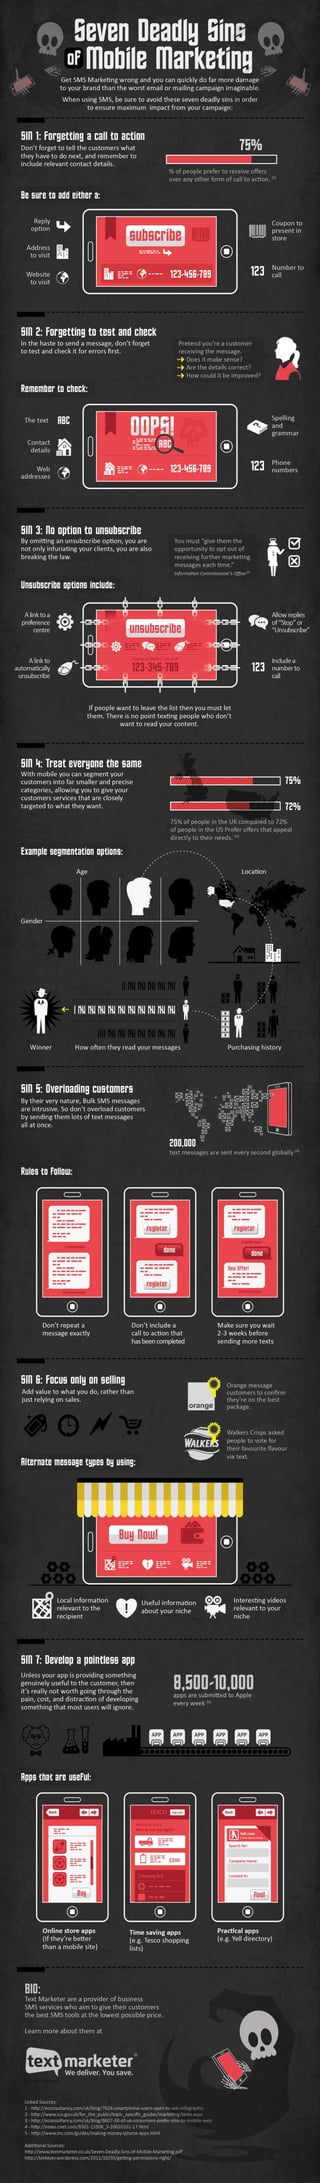 Seven deadly sins of mobile marketing